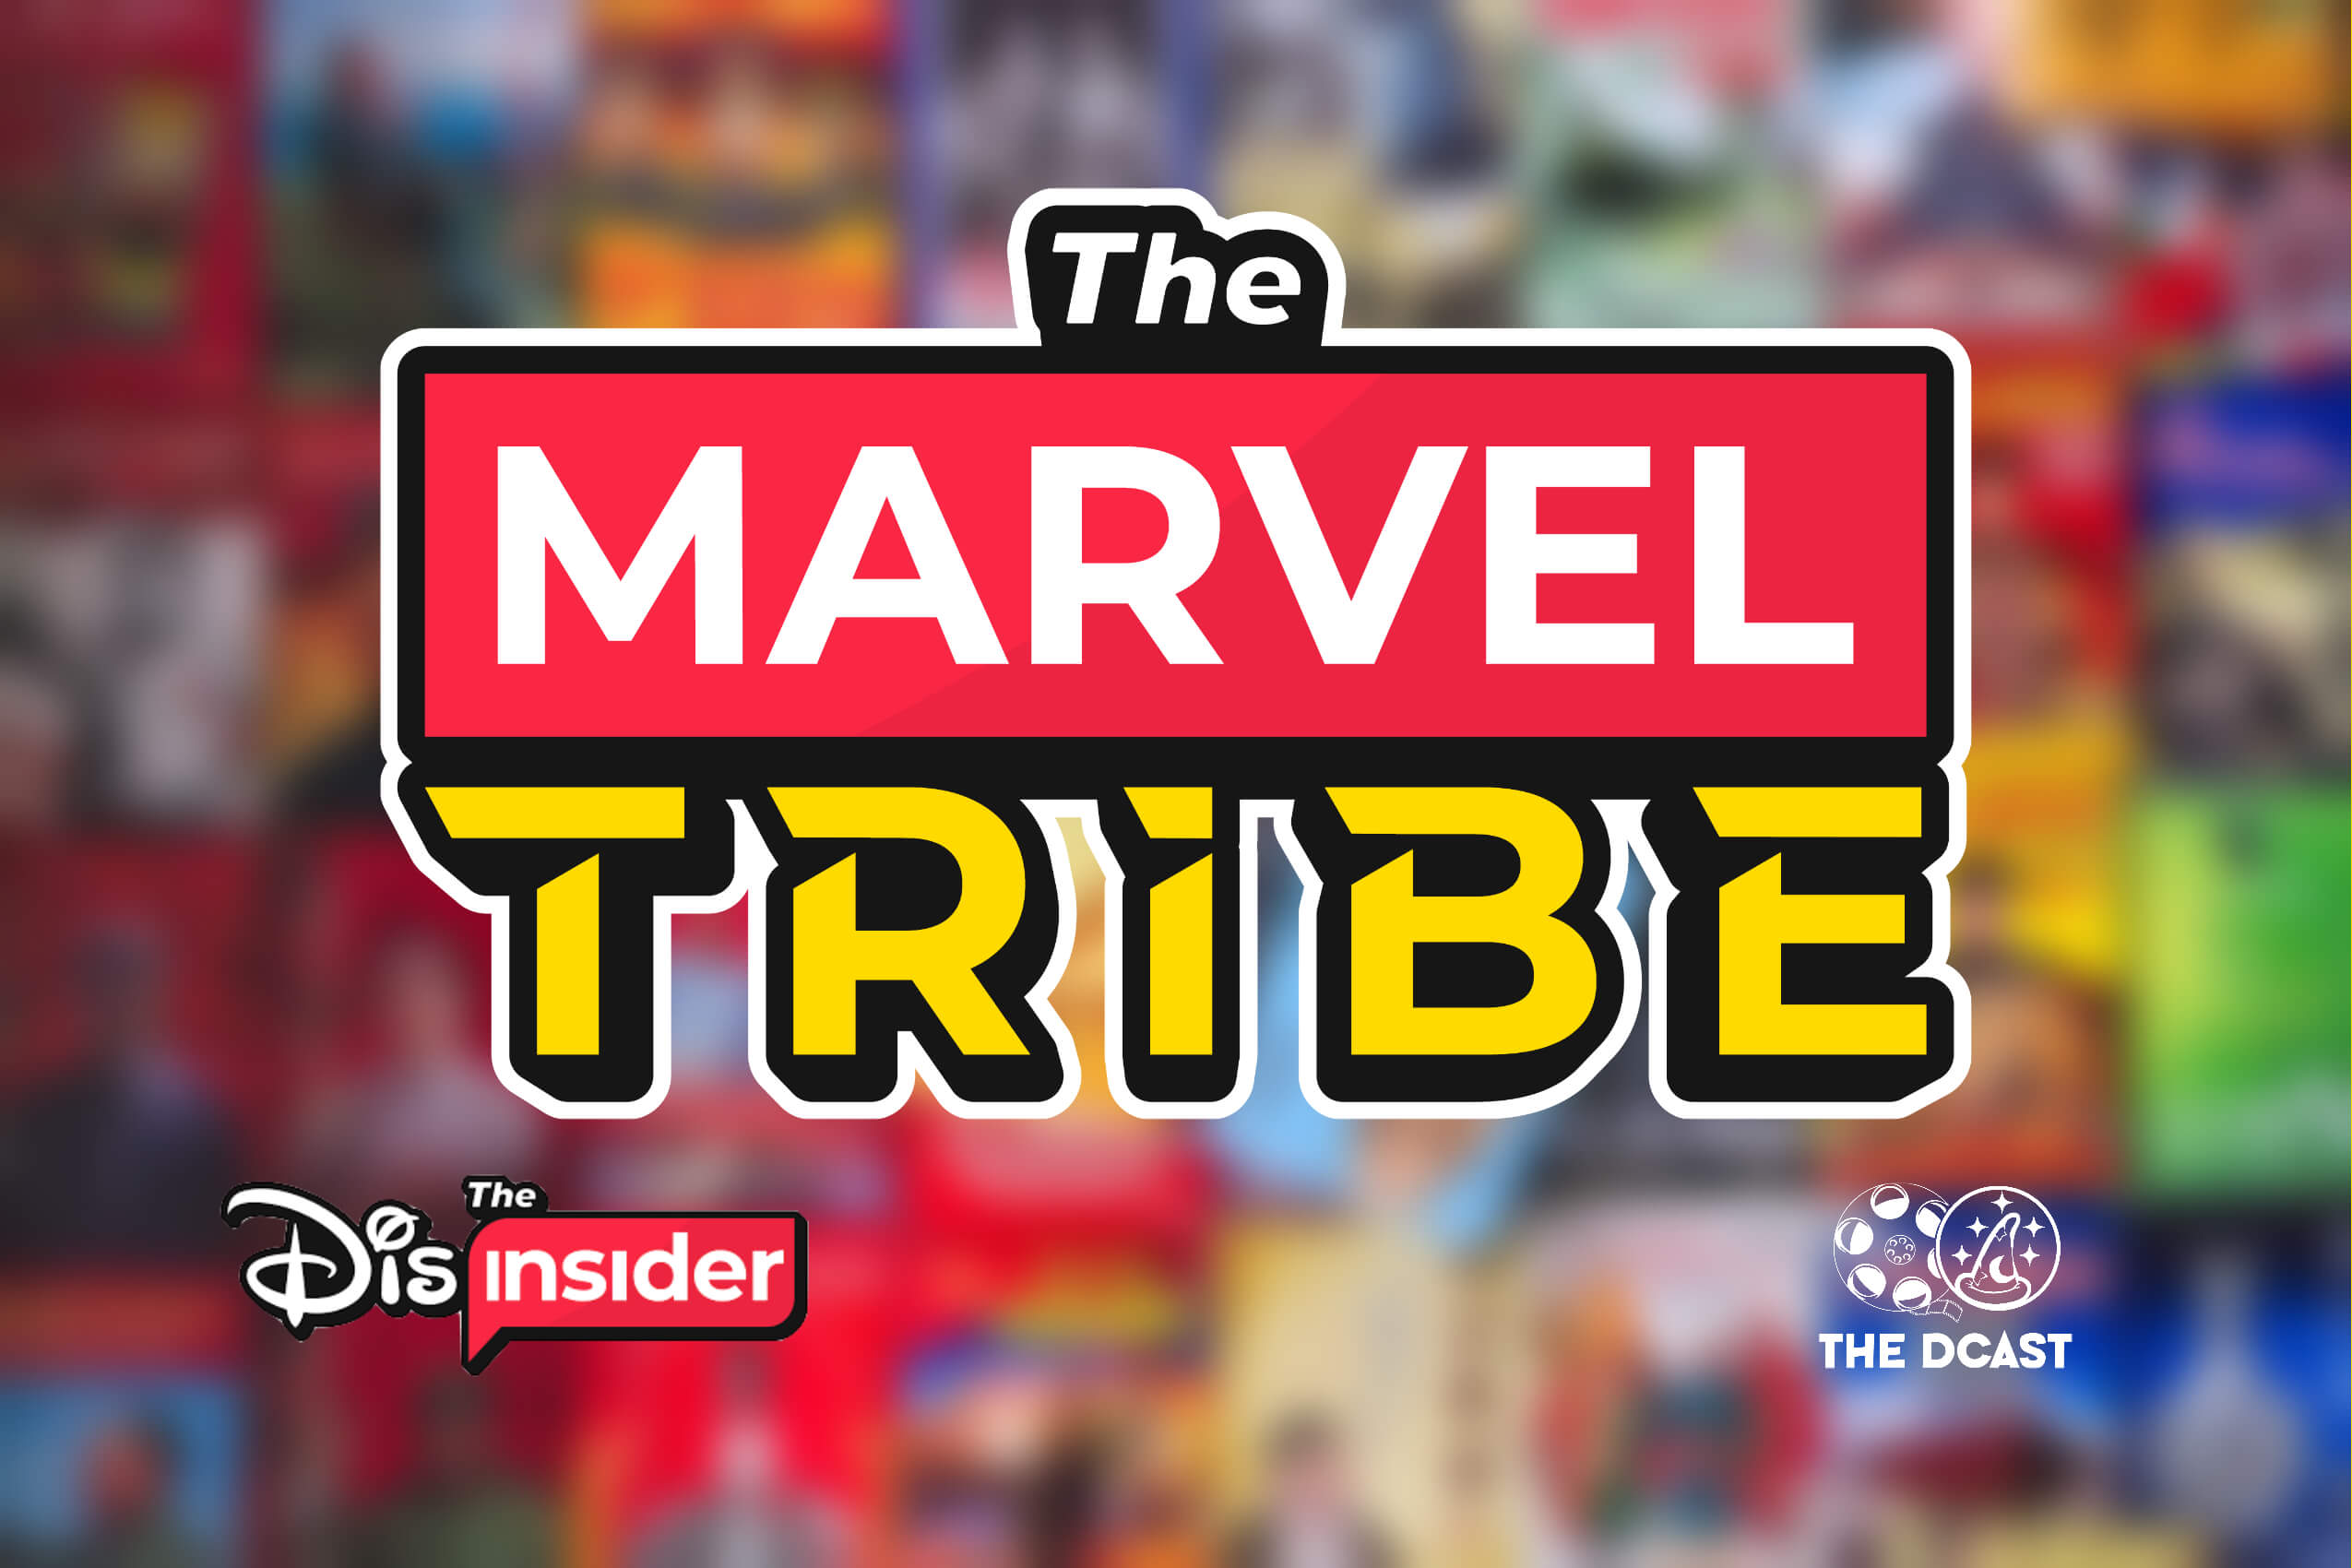 The Marvel Tribe: A Marvel Podcast from The DCast | The Invisible Hulk